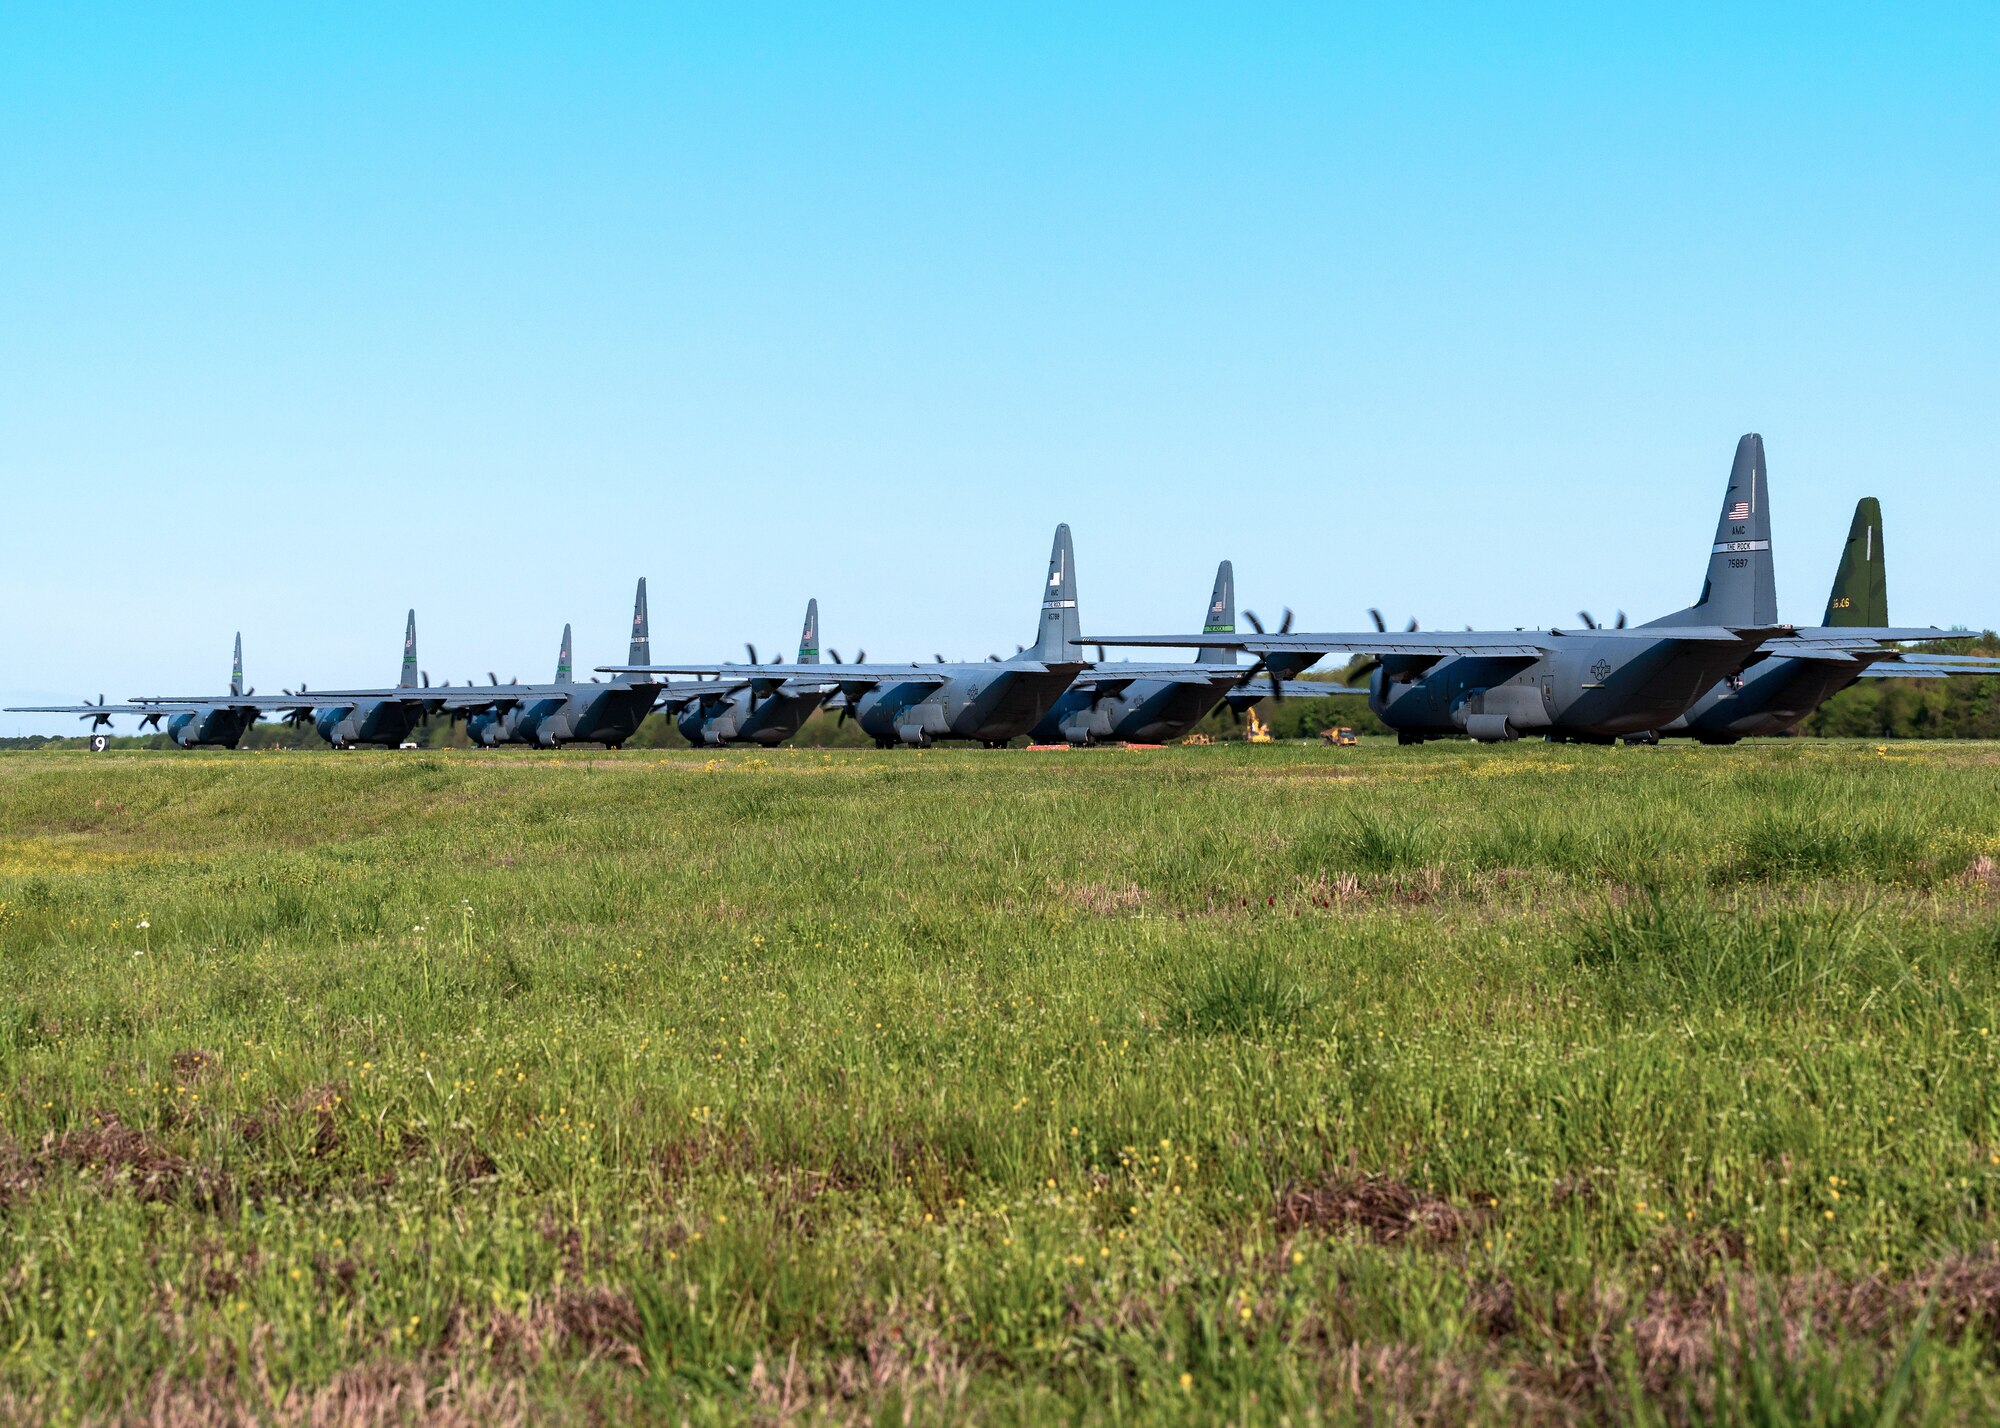 C-130Js line up for take off